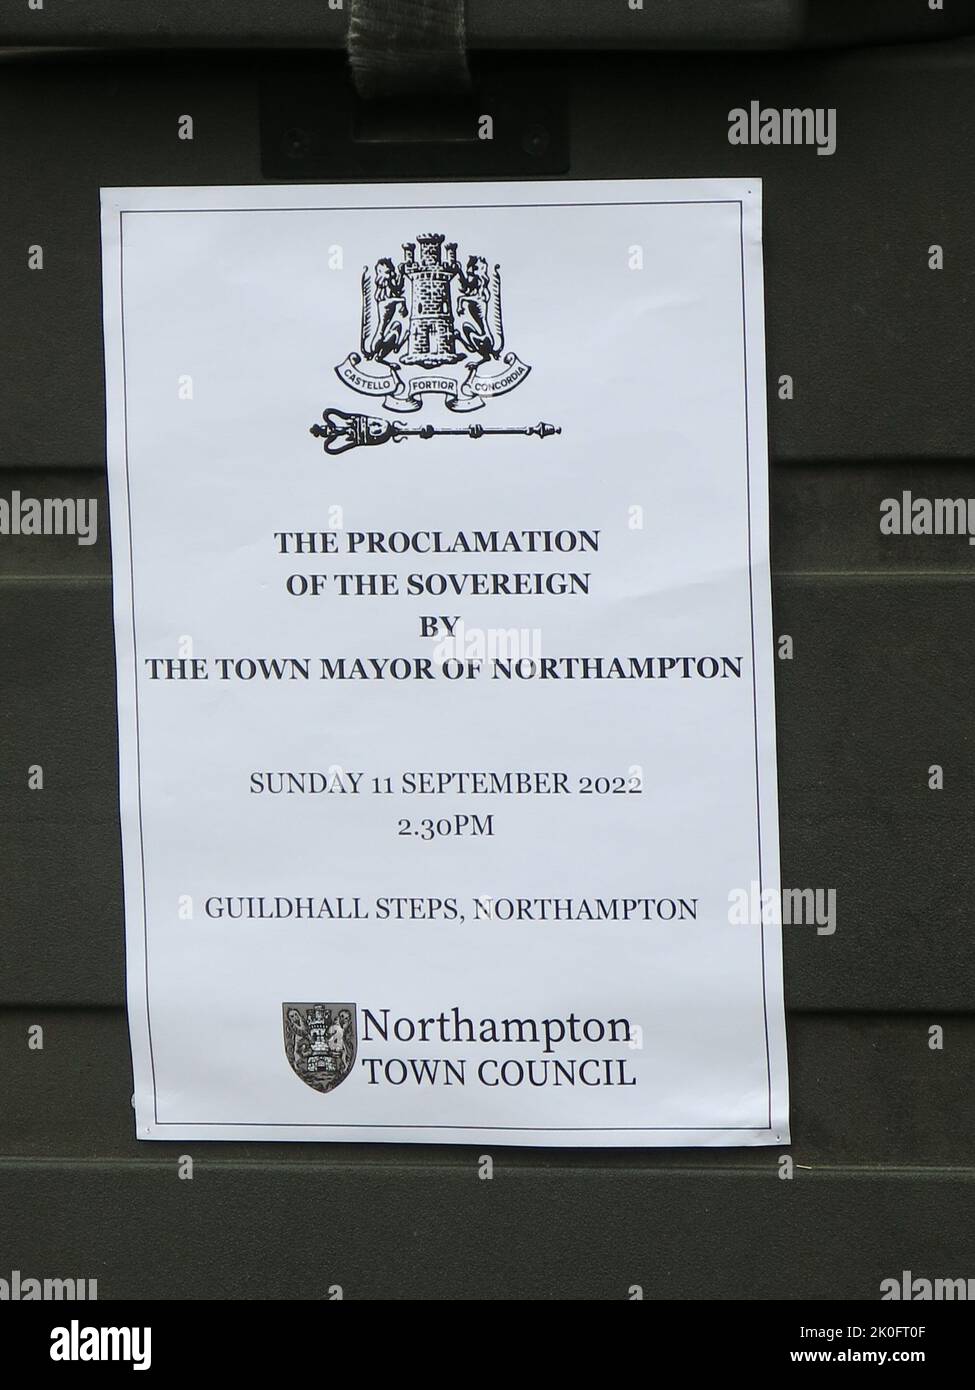 The poster at Northampton Guildhall announcing the ceremony for the Proclamation of the Sovereign, King Charles III on 11 September 2022. Stock Photo